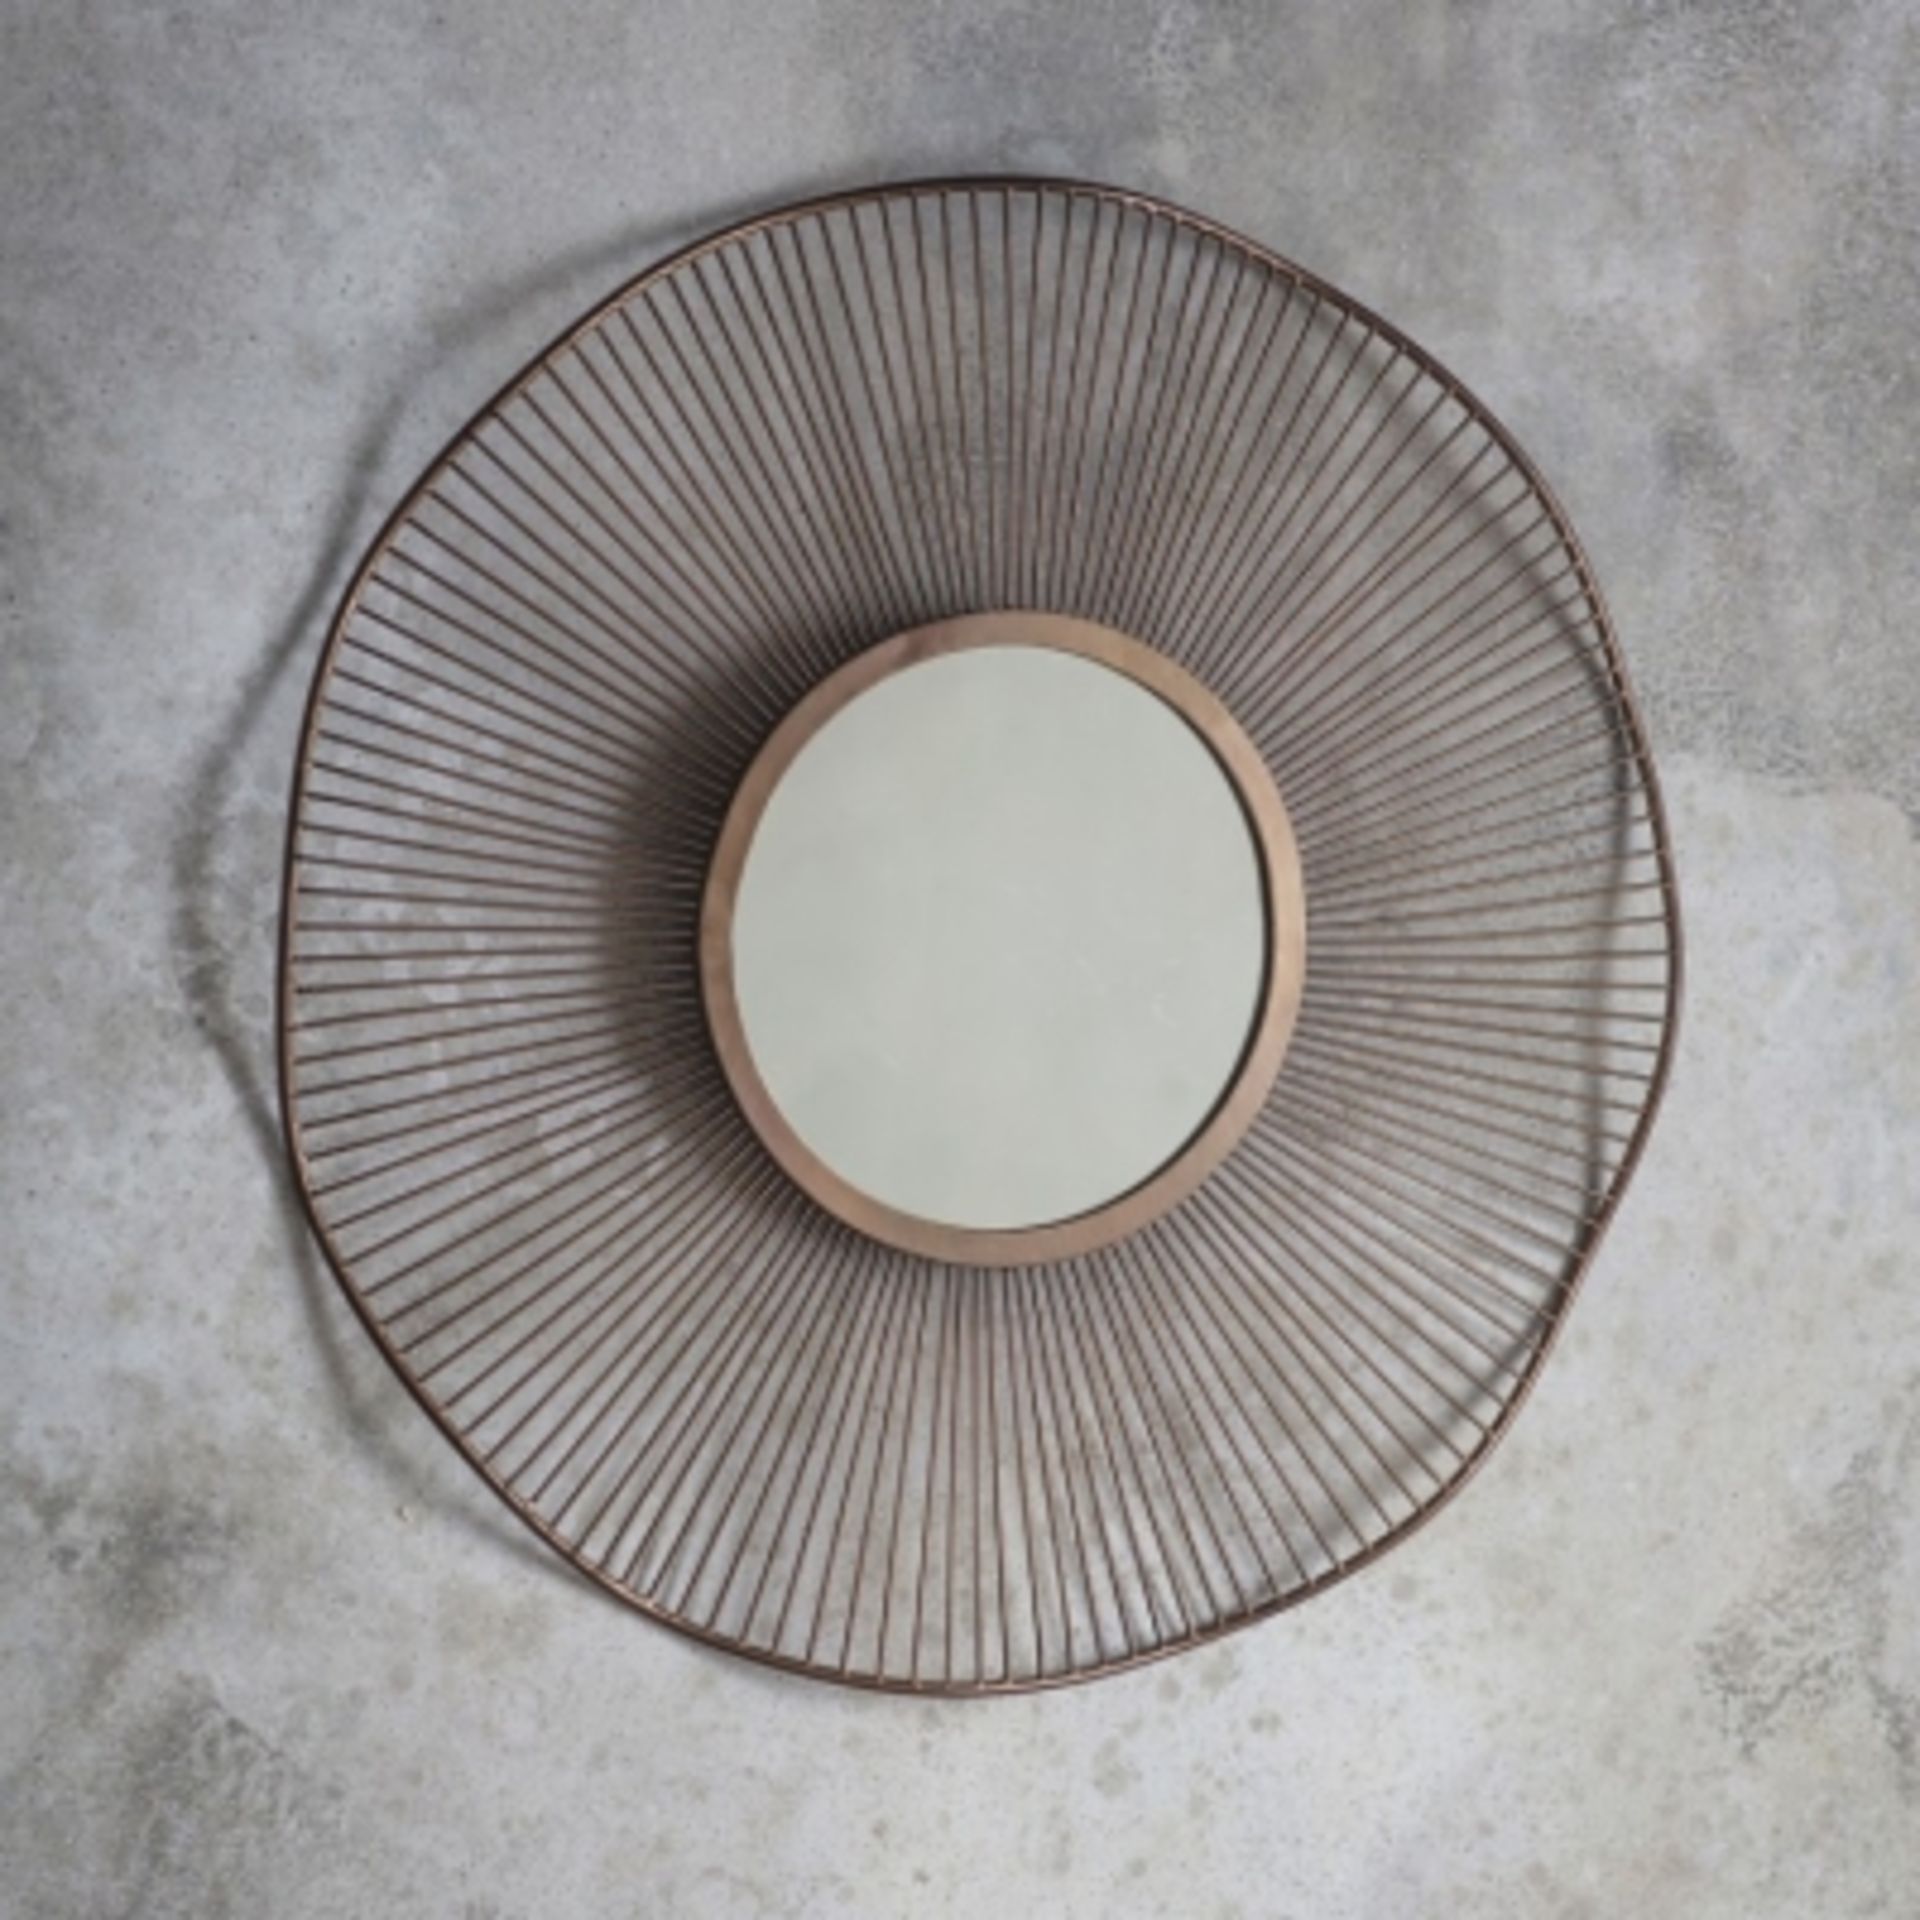 Rossner Mirror Bronze The Bronze Effect Of The Rossner Is Very On Trend At The Moment And Is A Great